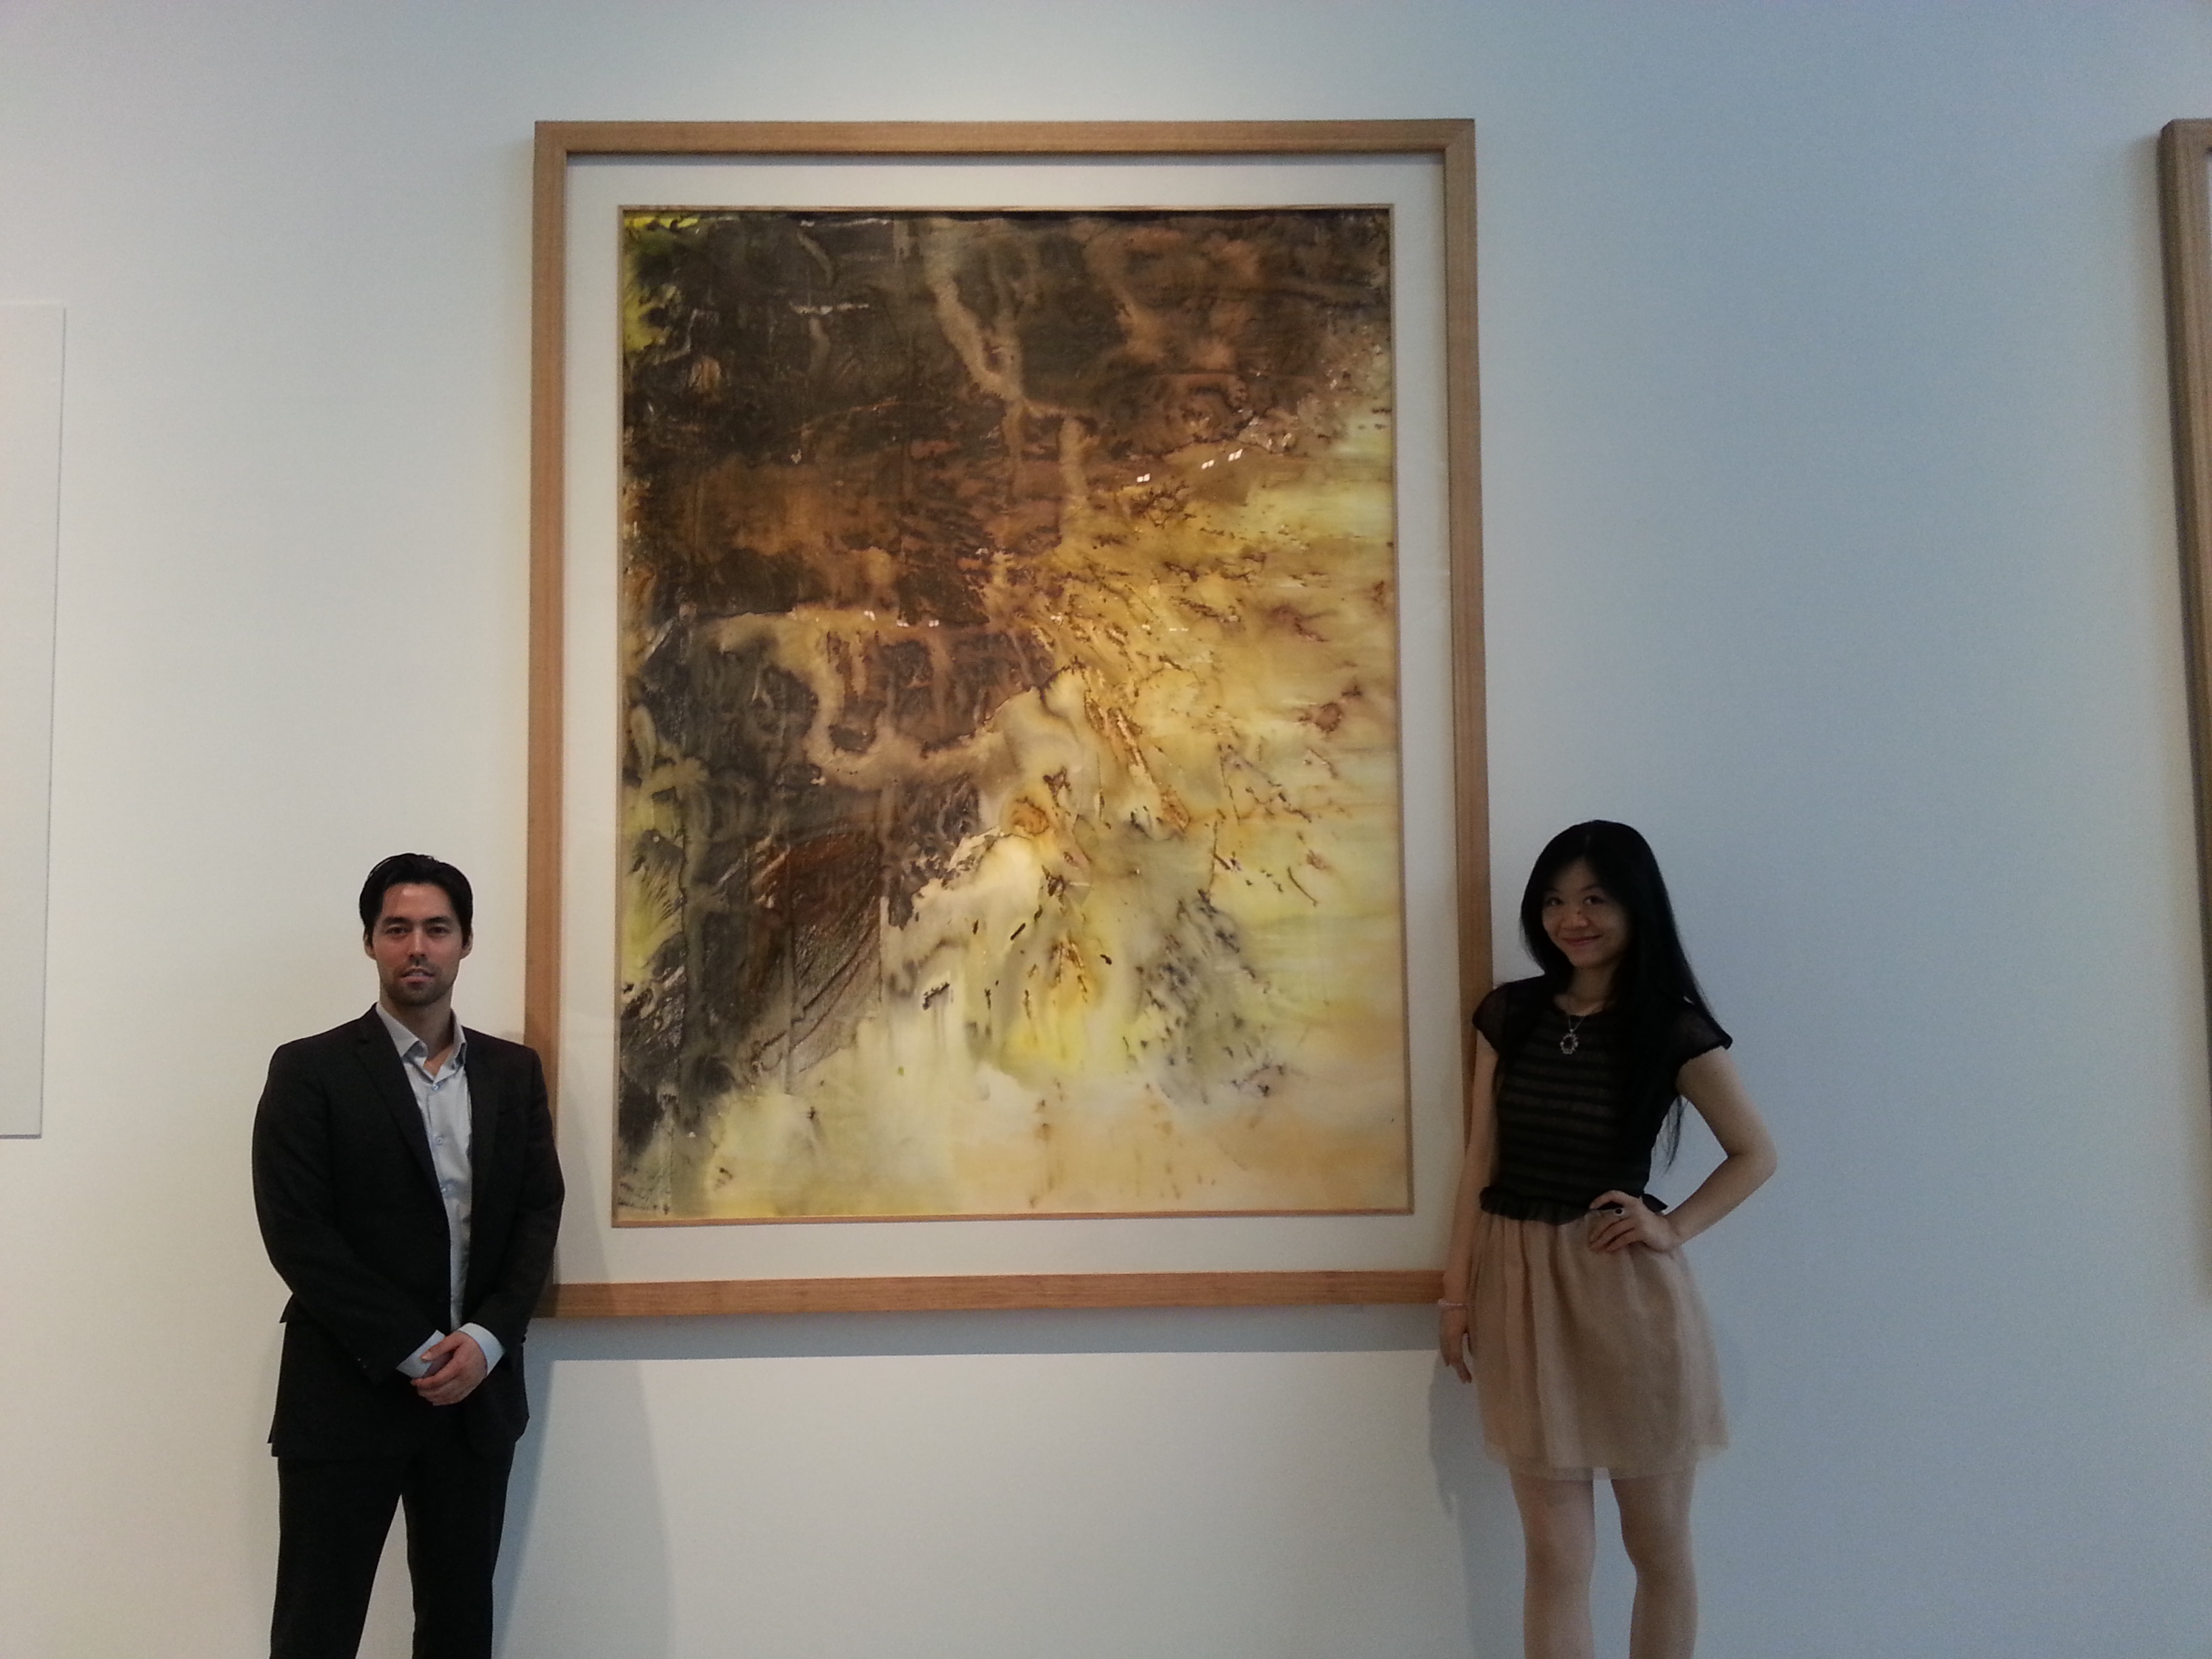 Derek Berg and Kathy Peng at the Power Station of Art exhibition.